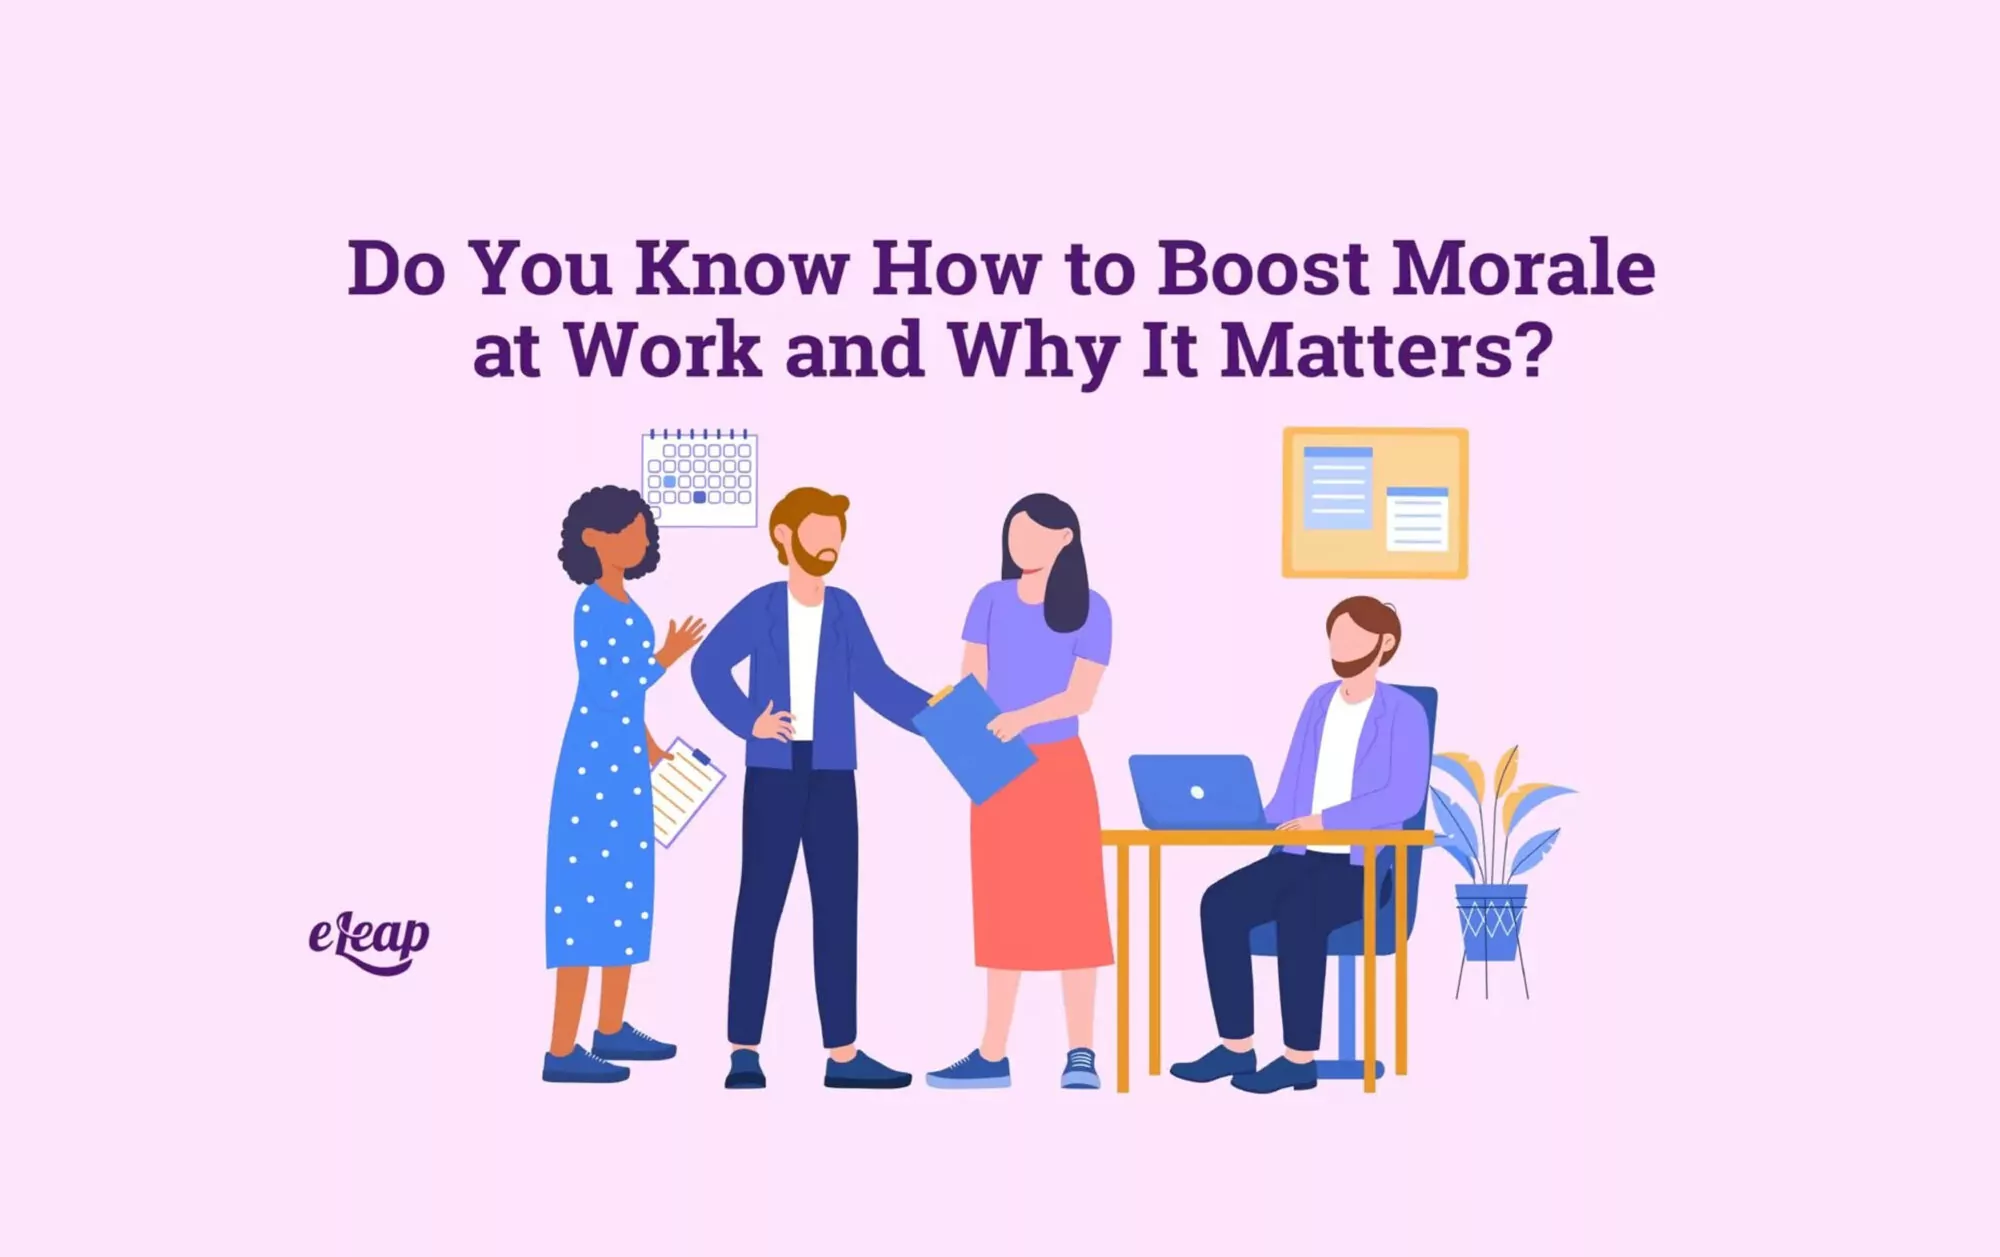 Do You Know How to Boost Morale at Work and Why It Matters